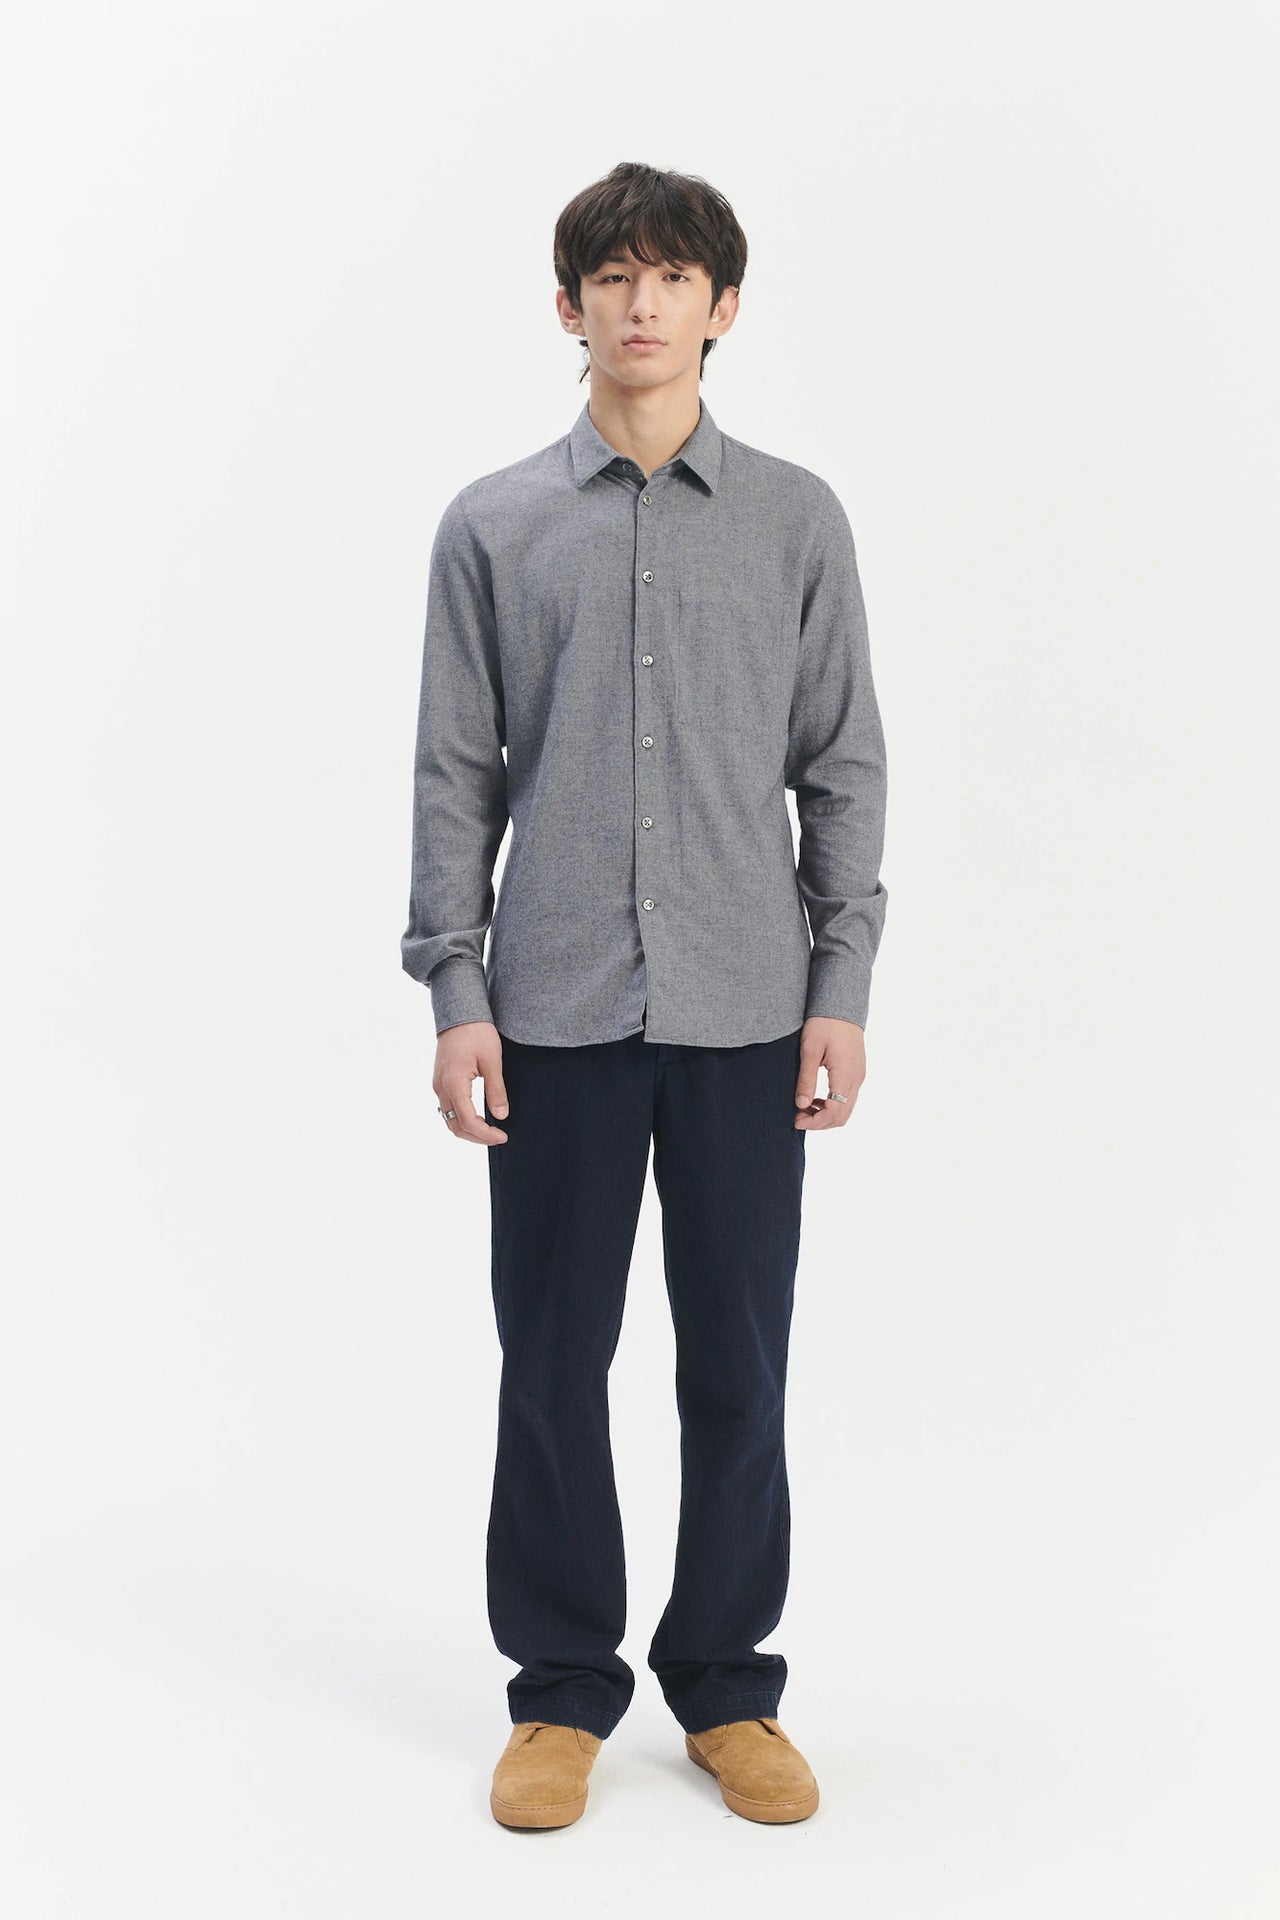 Feel Good Shirt in the Finest Mix of Soft Grey Italian Cotton and Virgin Wool